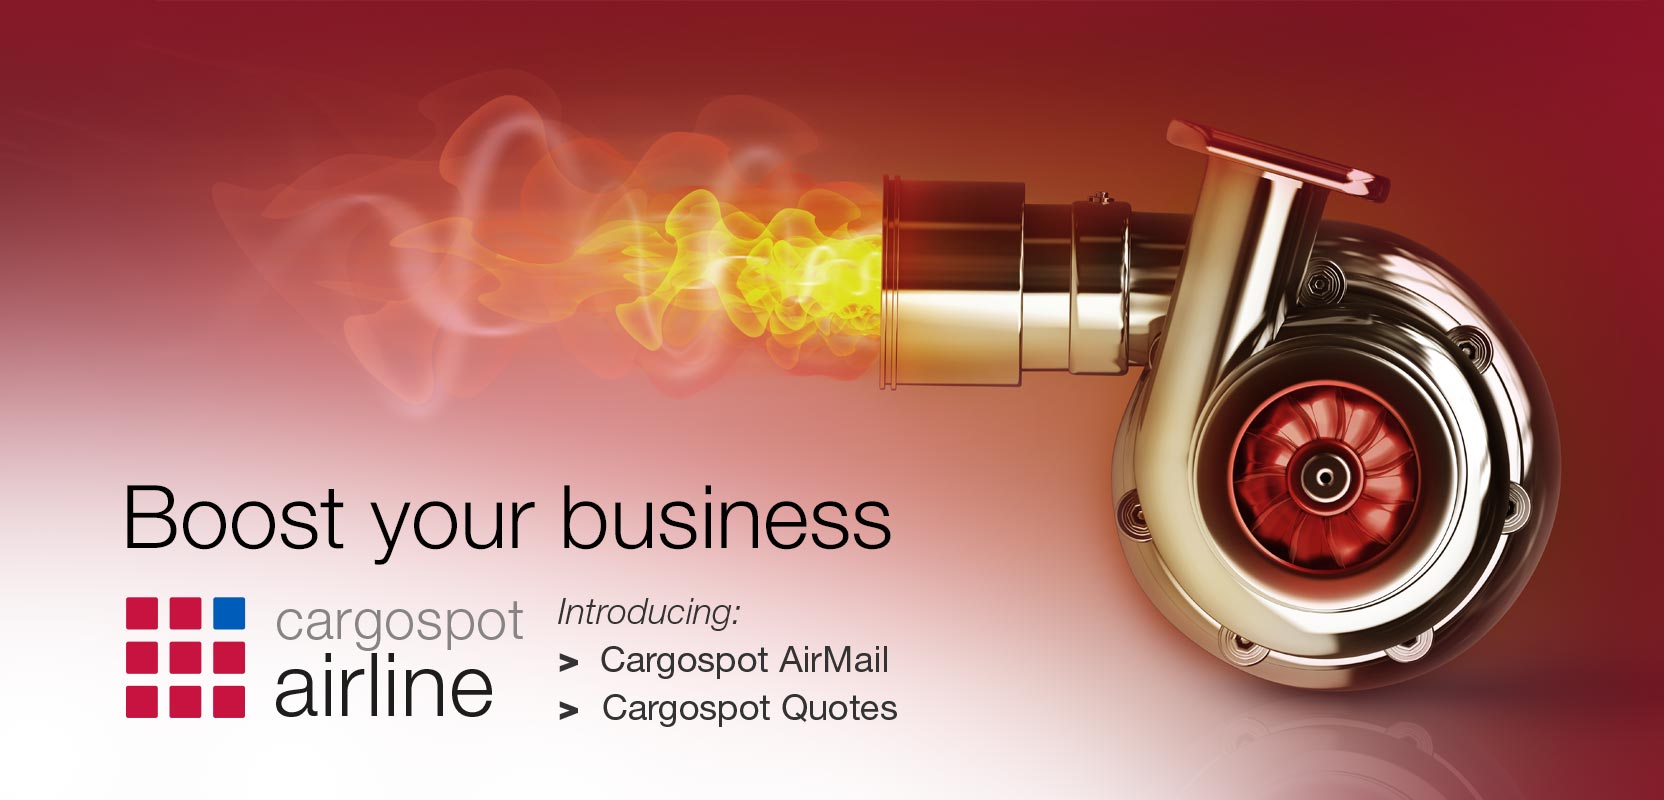 Boost your business with Cargospot